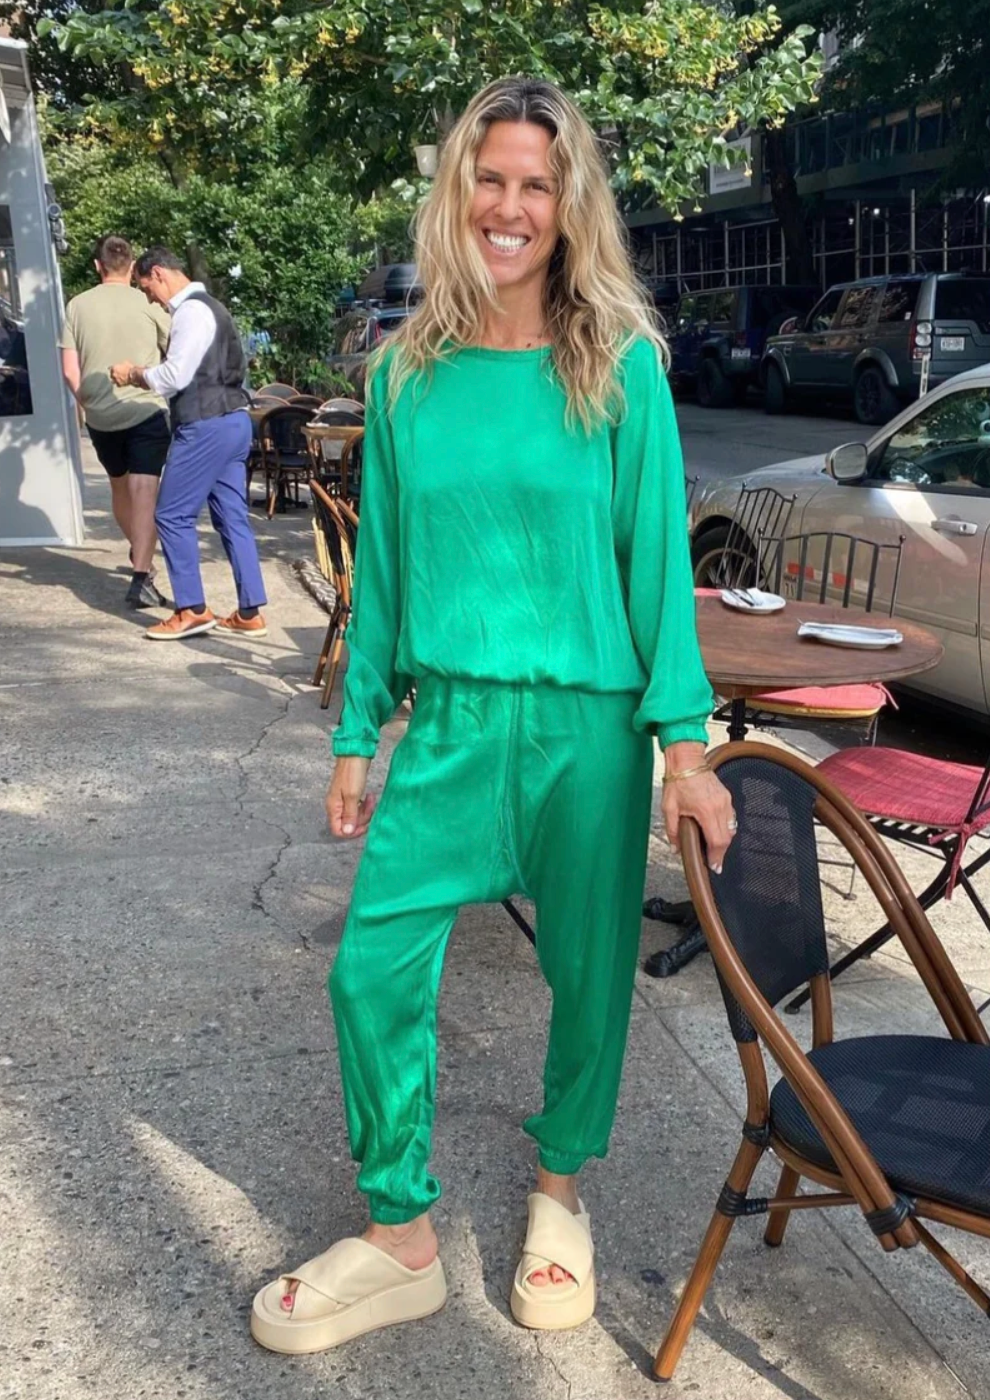 A joyful woman in a vibrant green outfit standing on a sunlit sidewalk in Scottsdale Arizona, with people and outdoor café seating in the background. She wears white shoes and has long, wavy blonde hair while clutching the BOWIE | SATIN Kelly from Aquarius Cocktail.